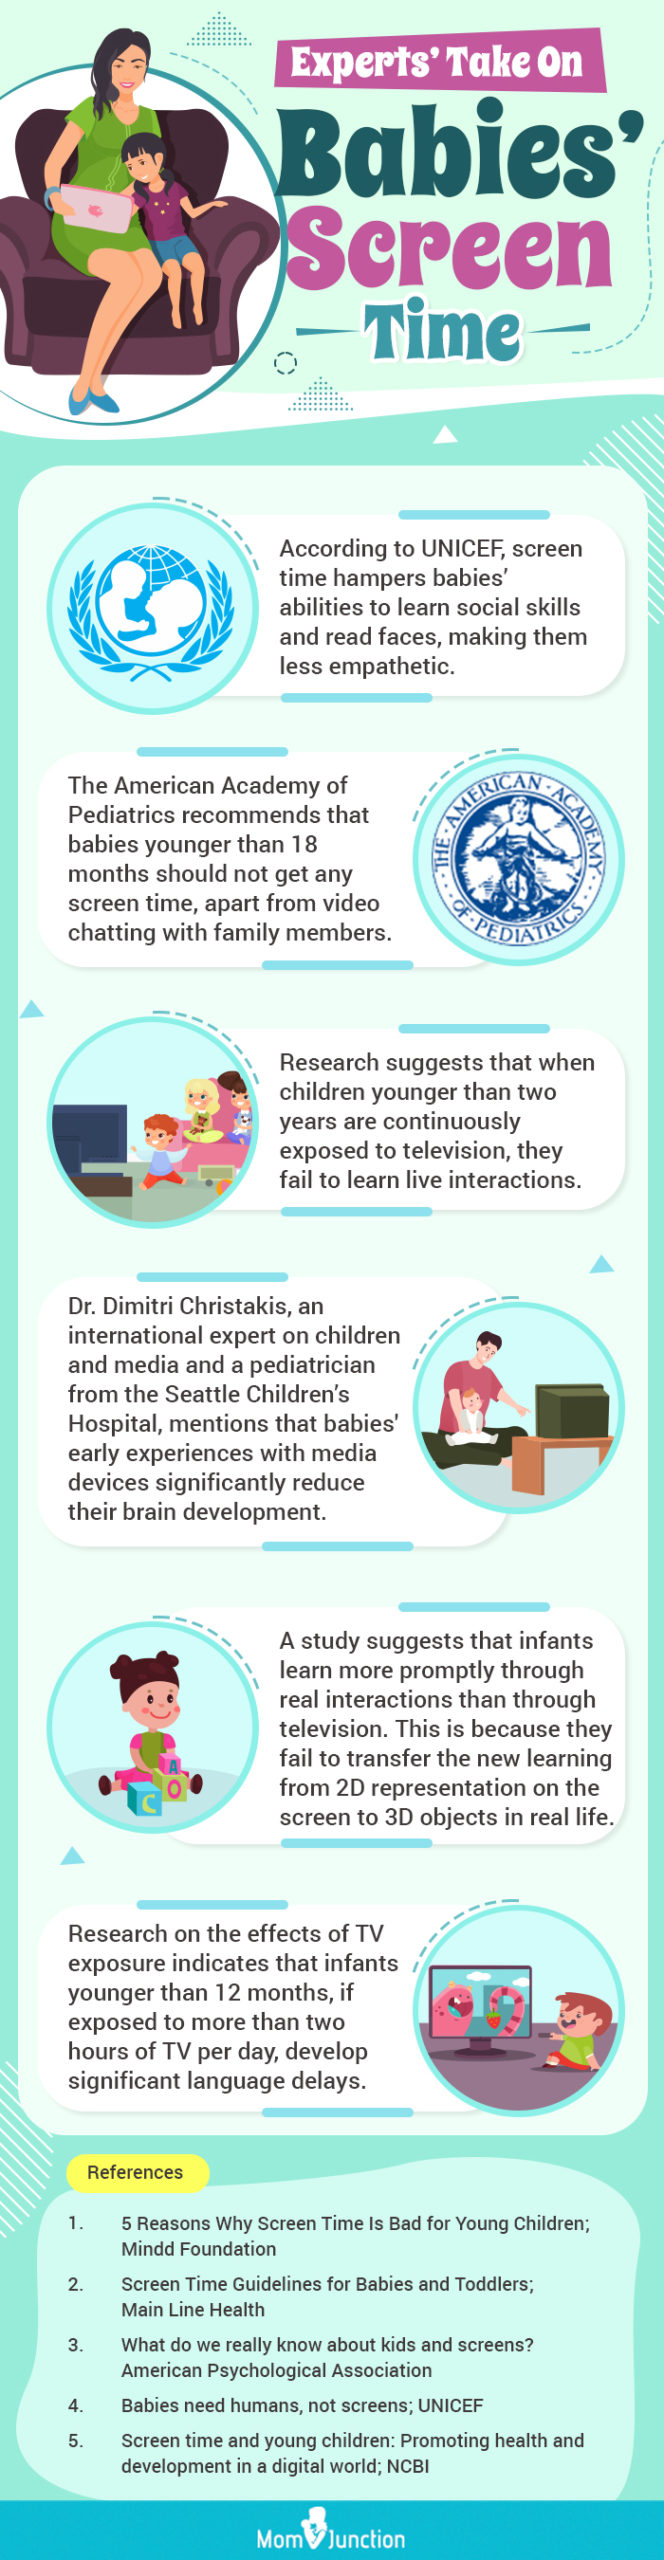 experts take on babies screen time (infographic)